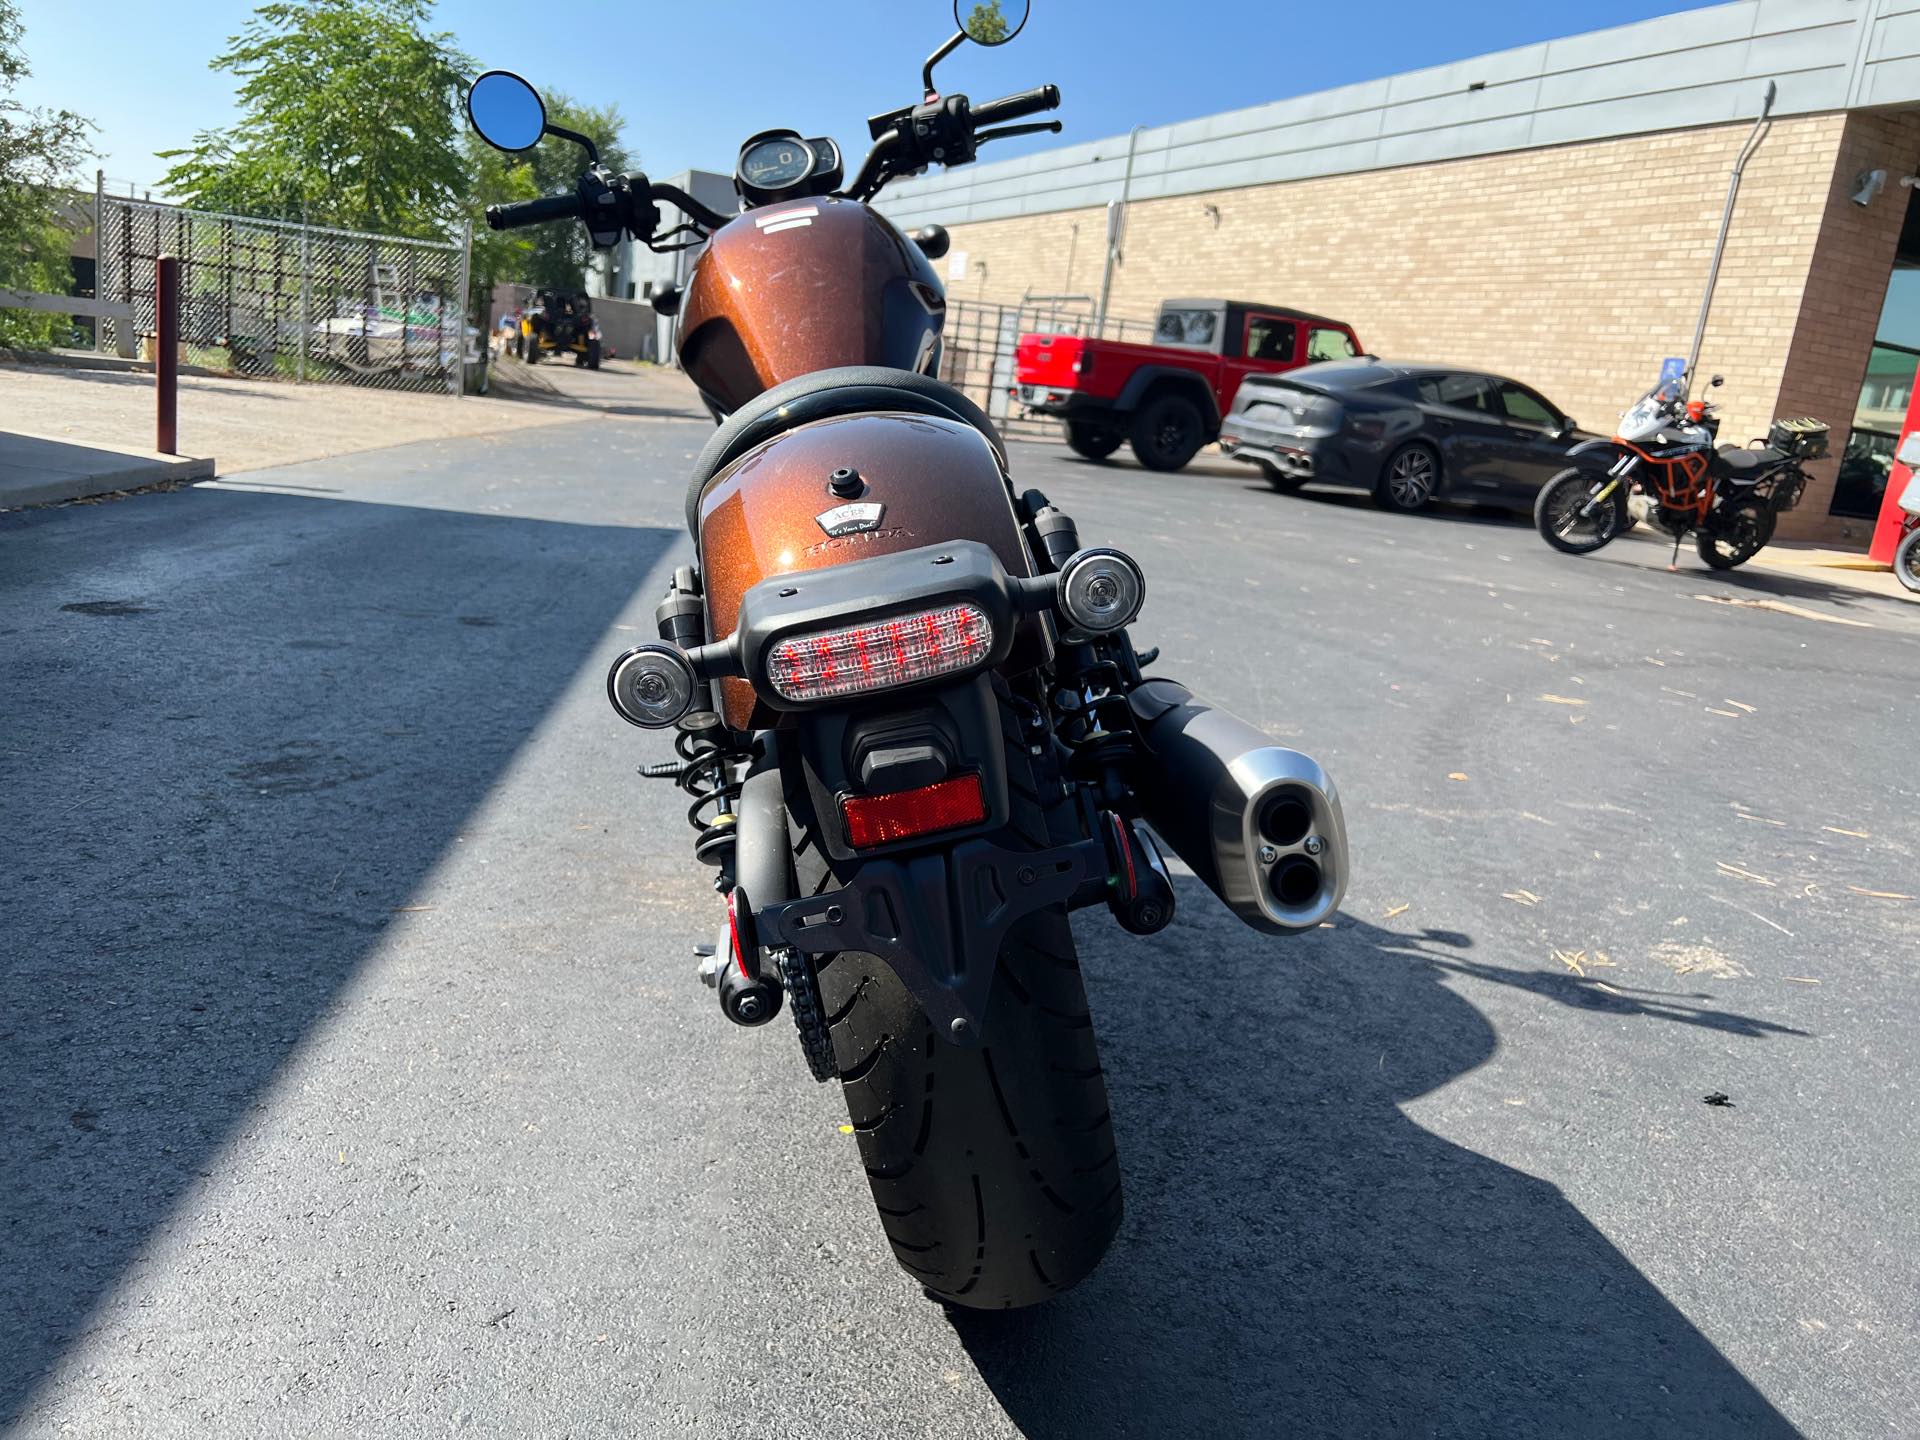 2022 Honda Rebel 1100 DCT at Aces Motorcycles - Fort Collins